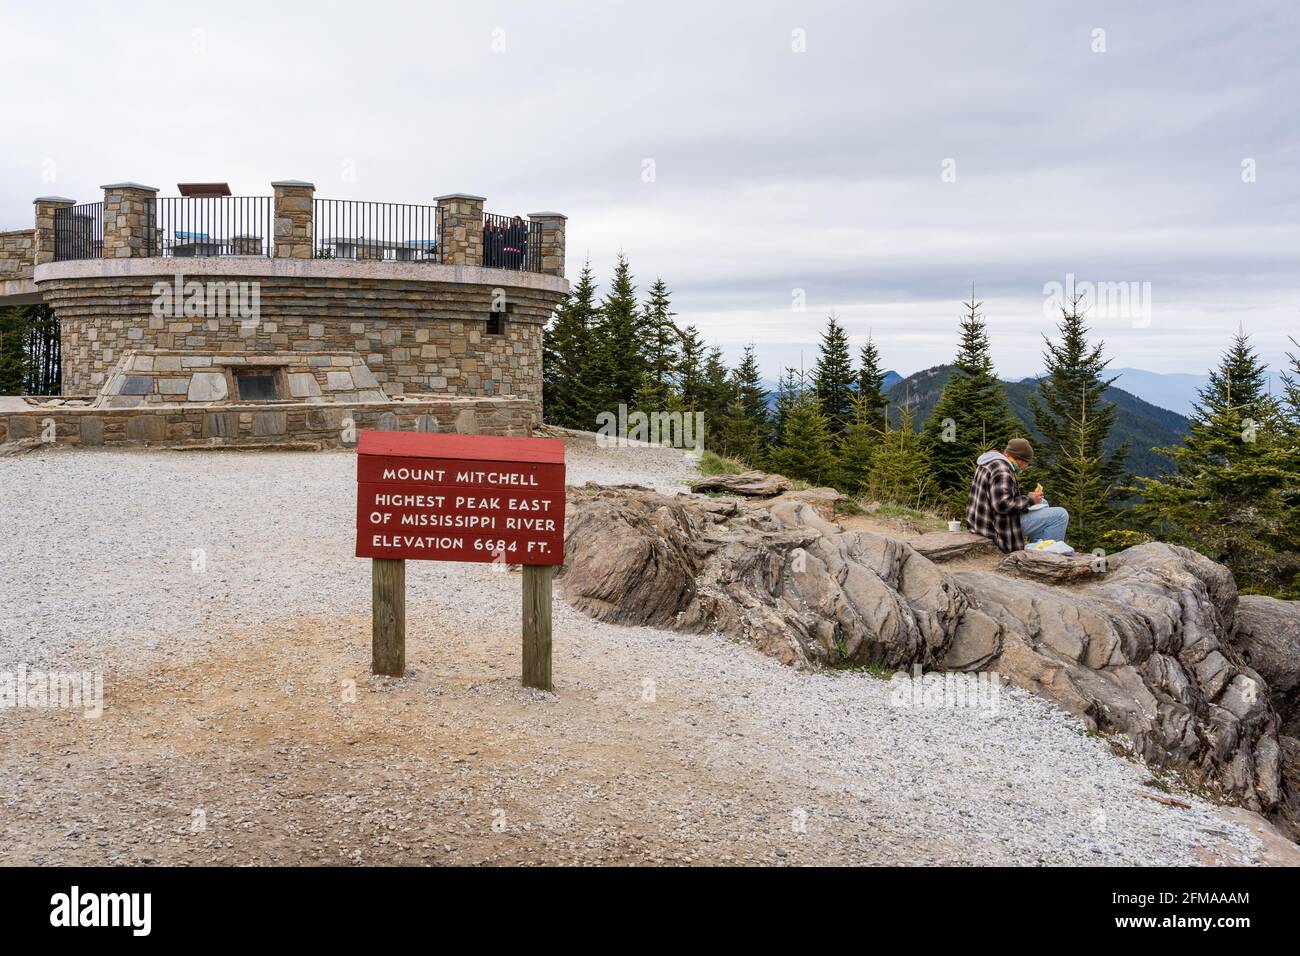 Burnsville, NC - April 23, 2021: The top of Mount Mitchell, the highest peak east of the Mississippi River is a beautiful place for a picnic. Stock Photo